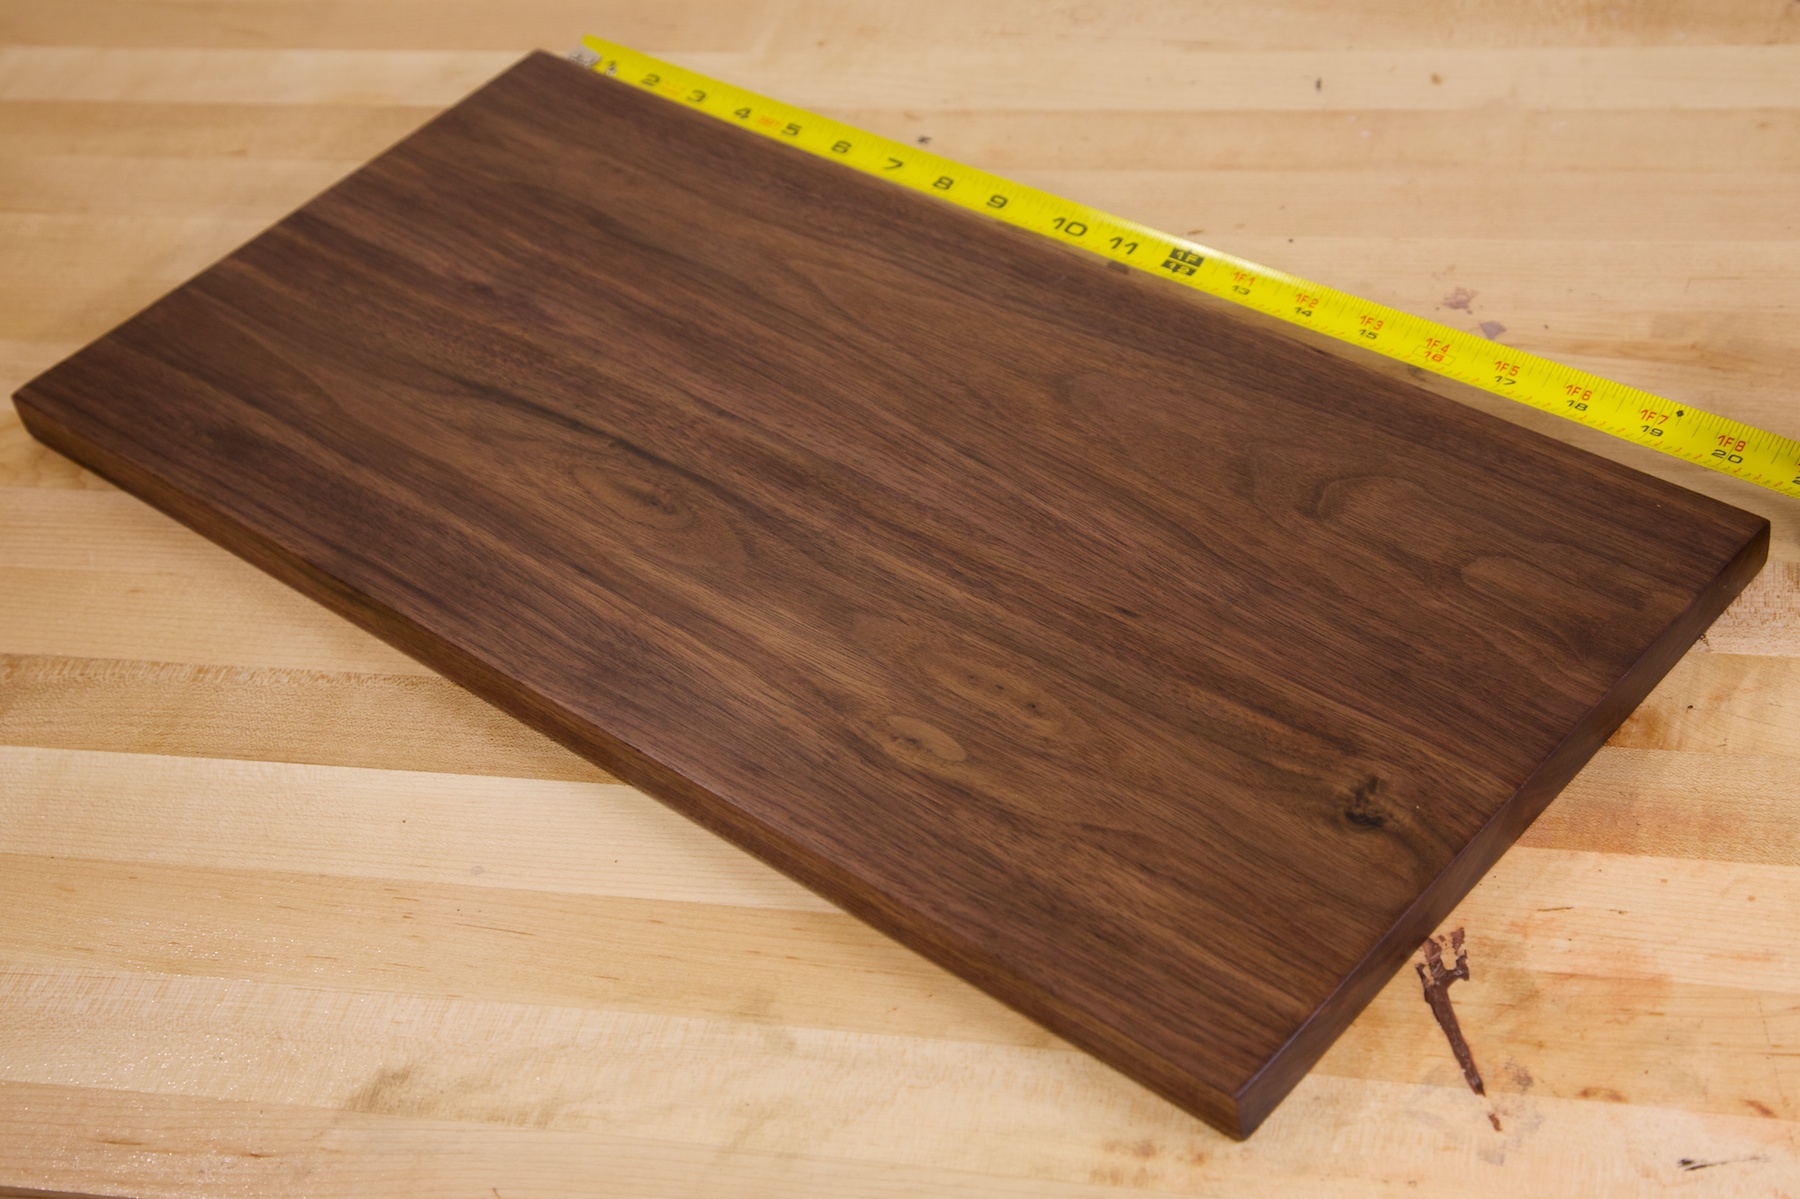 Oil Finish Can Go Wrong on Walnut - FineWoodworking